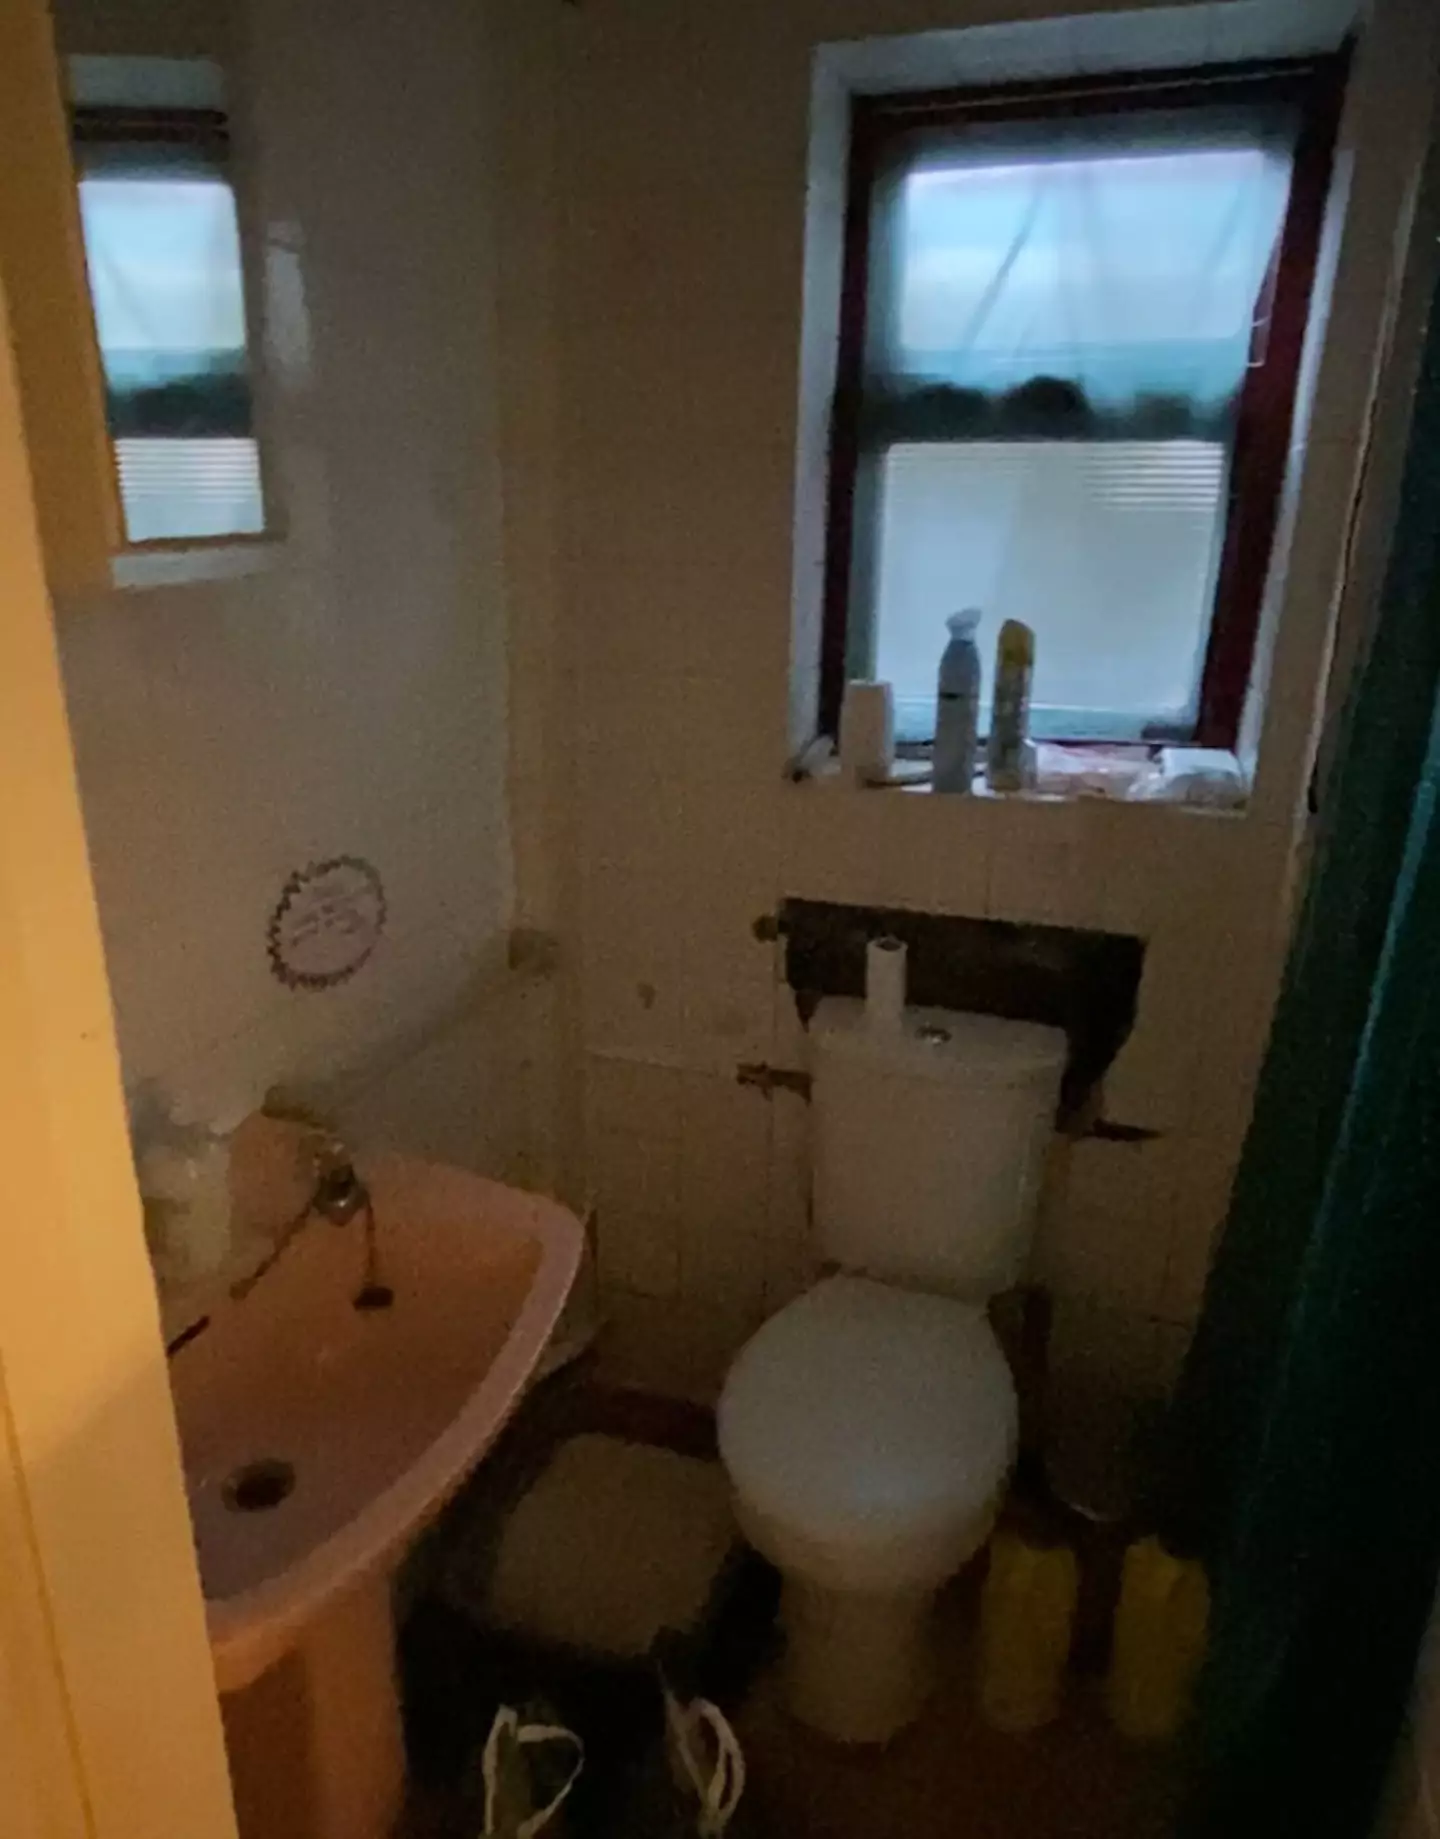 The room was located behind a wall in the bathroom.